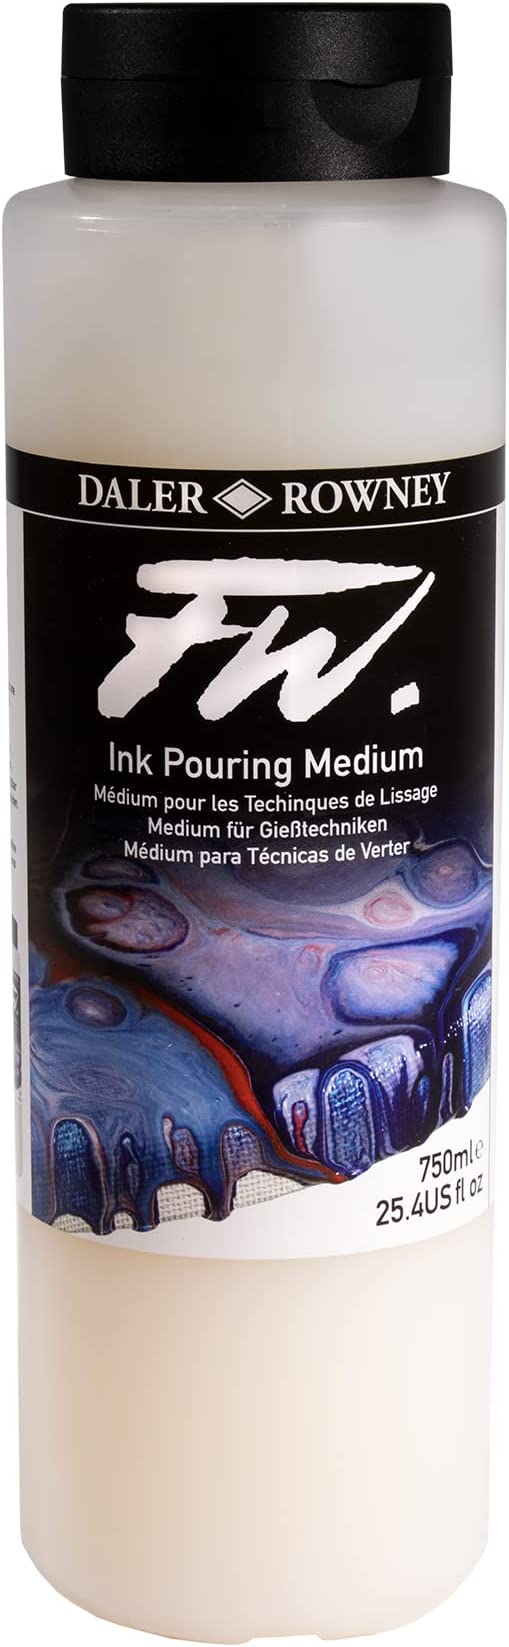 Daler Rowney FW Ink Pouring Medium 750ml (Pack of 1)